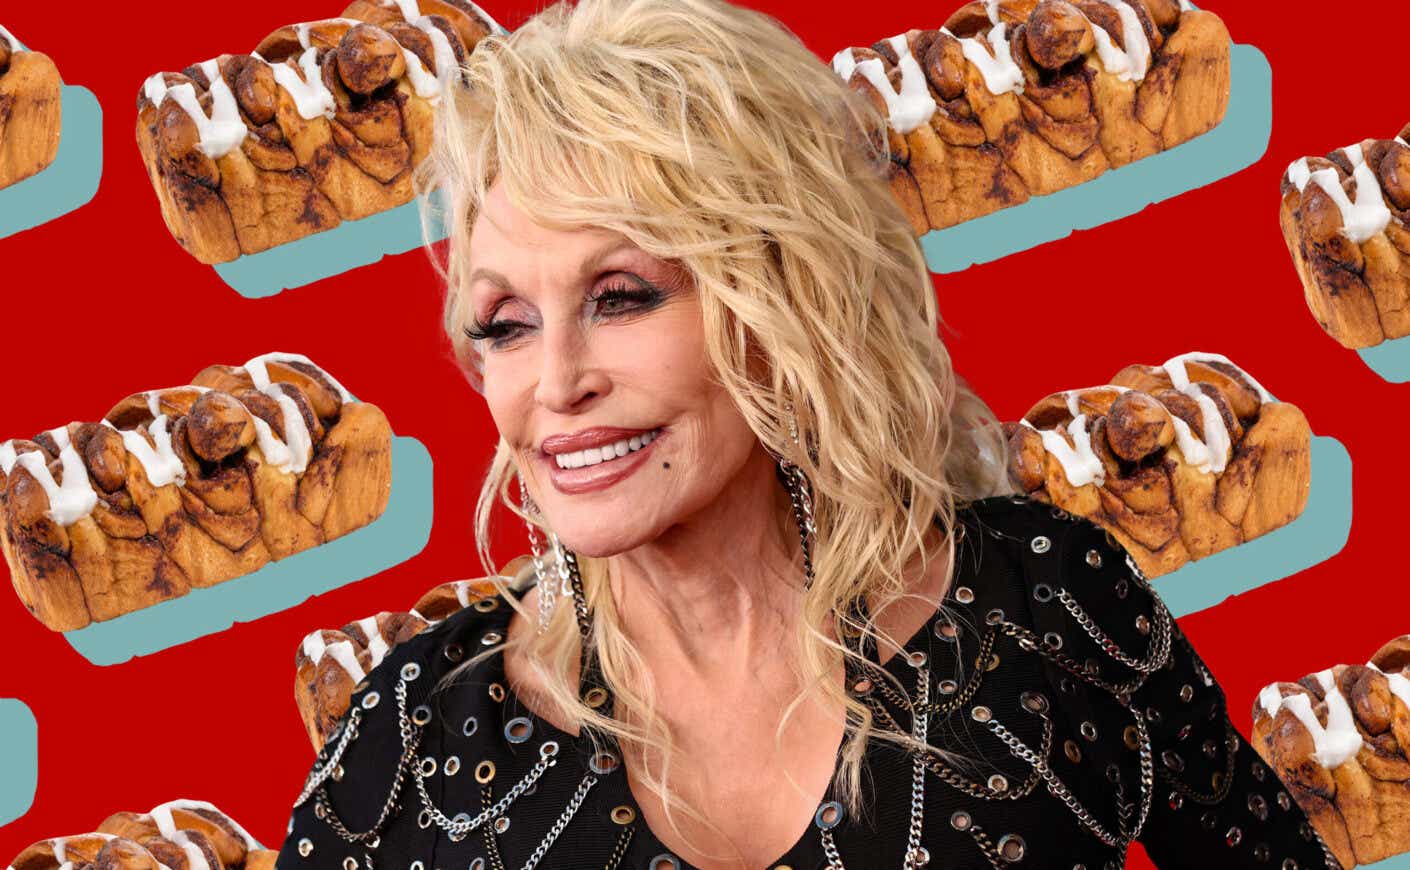 An image of Dolly Parton is layered over a collage of bread loaves.